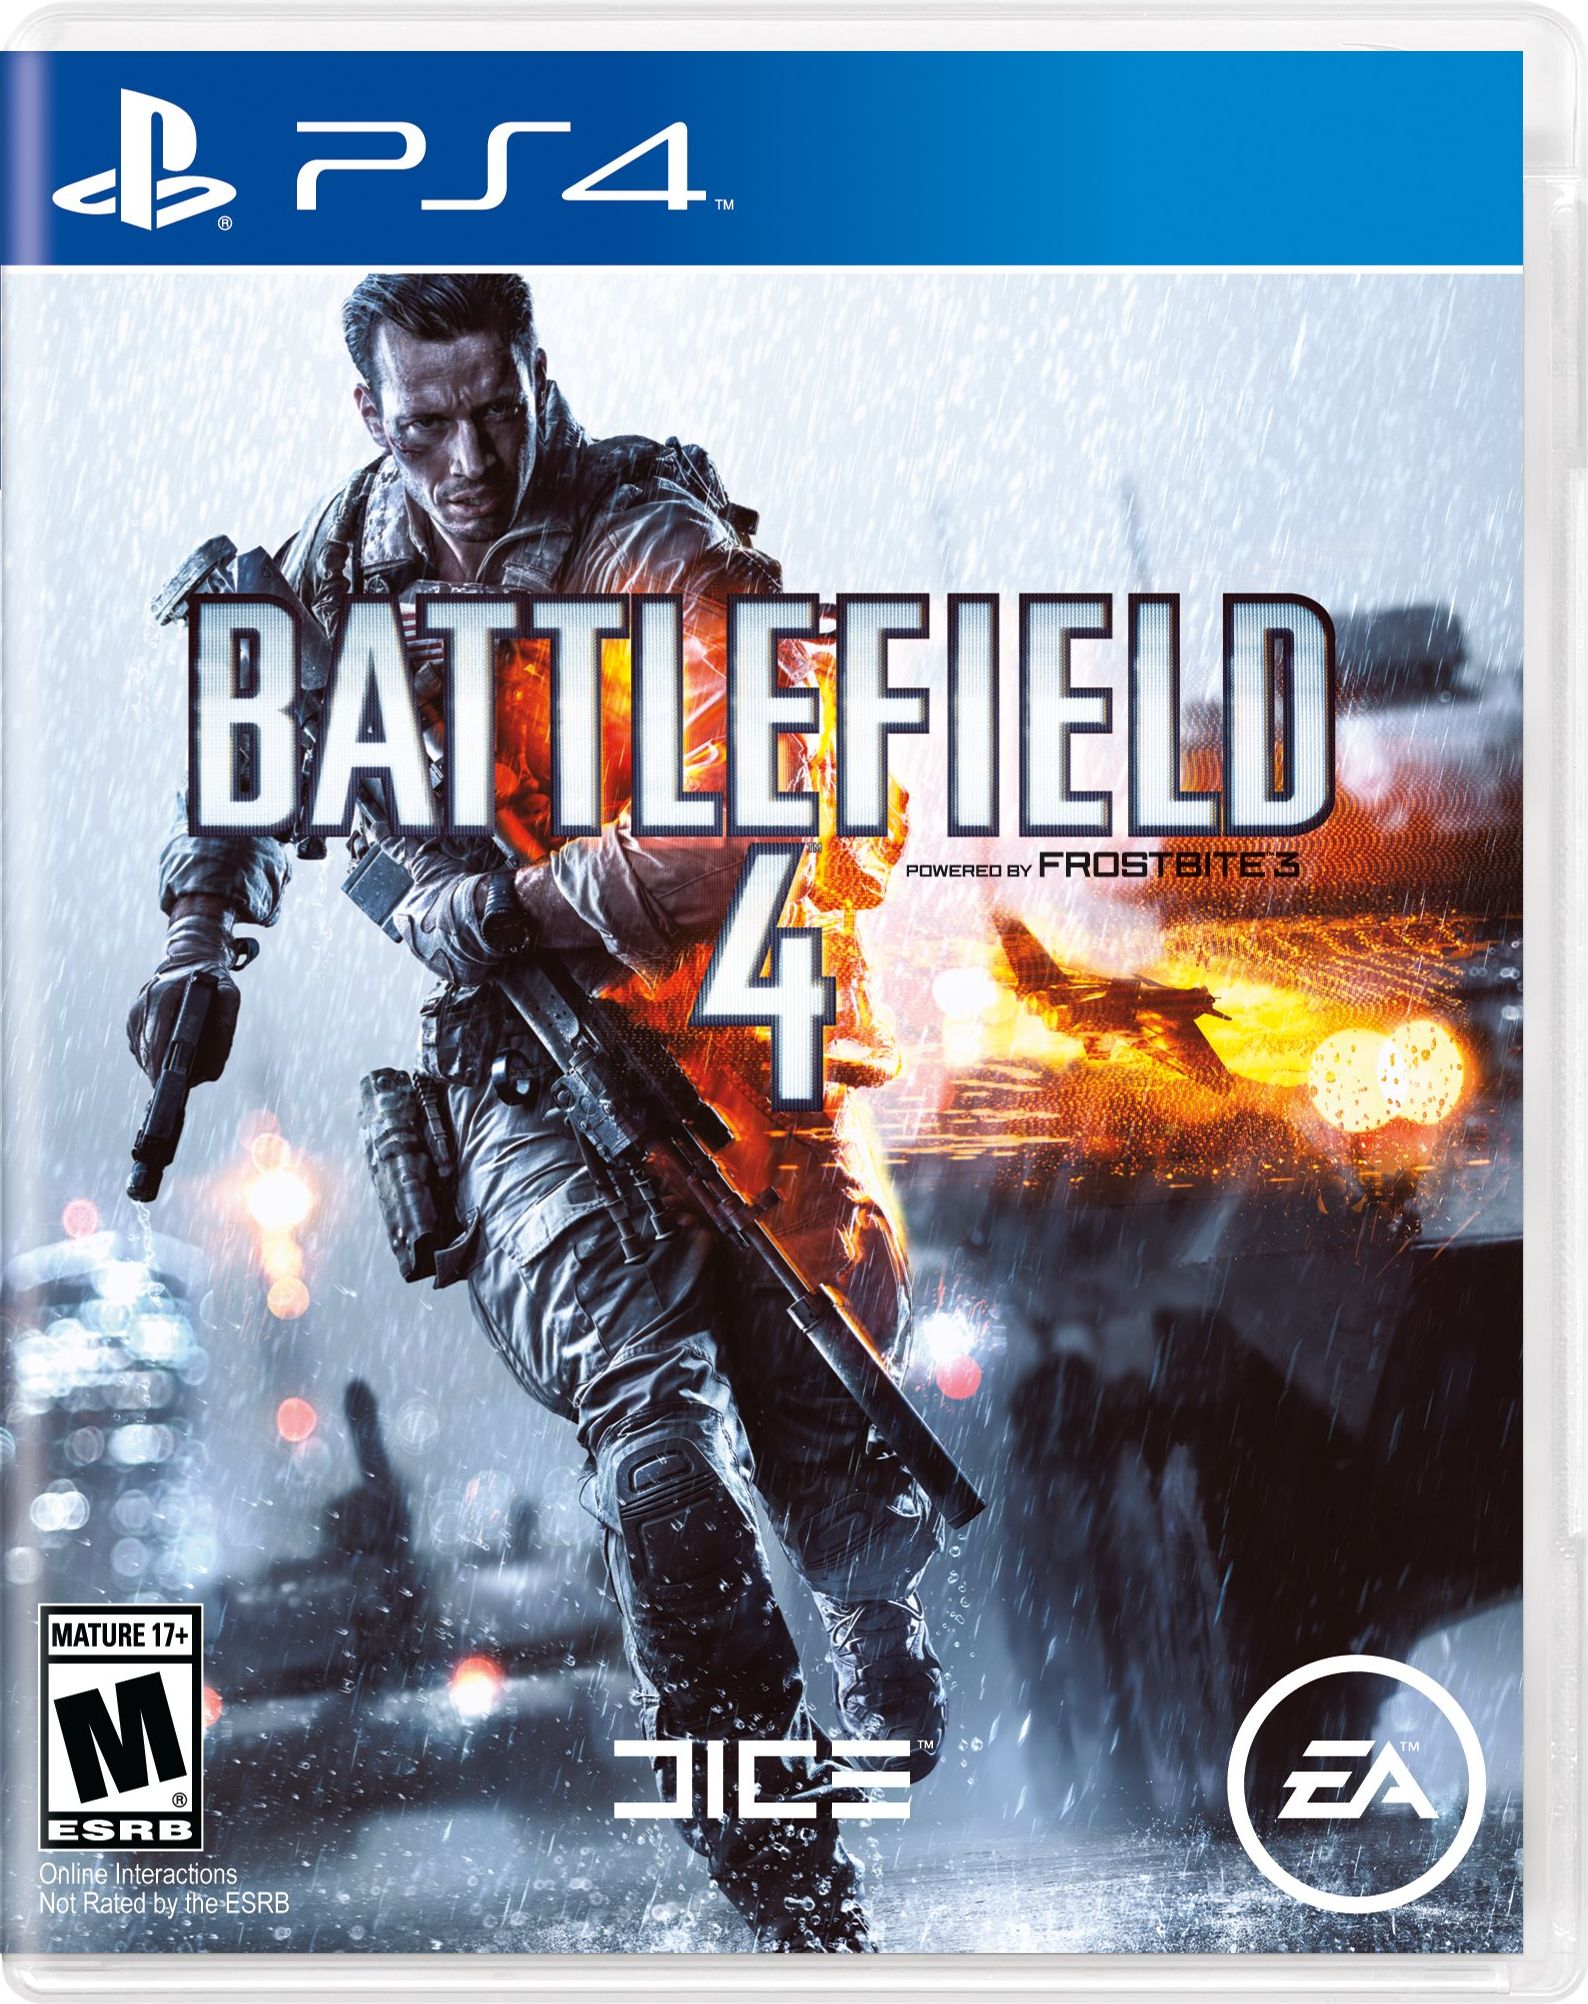 Battlefield 4 Release Date (Xbox One, PS4, Xbox 360, PS3, PC)